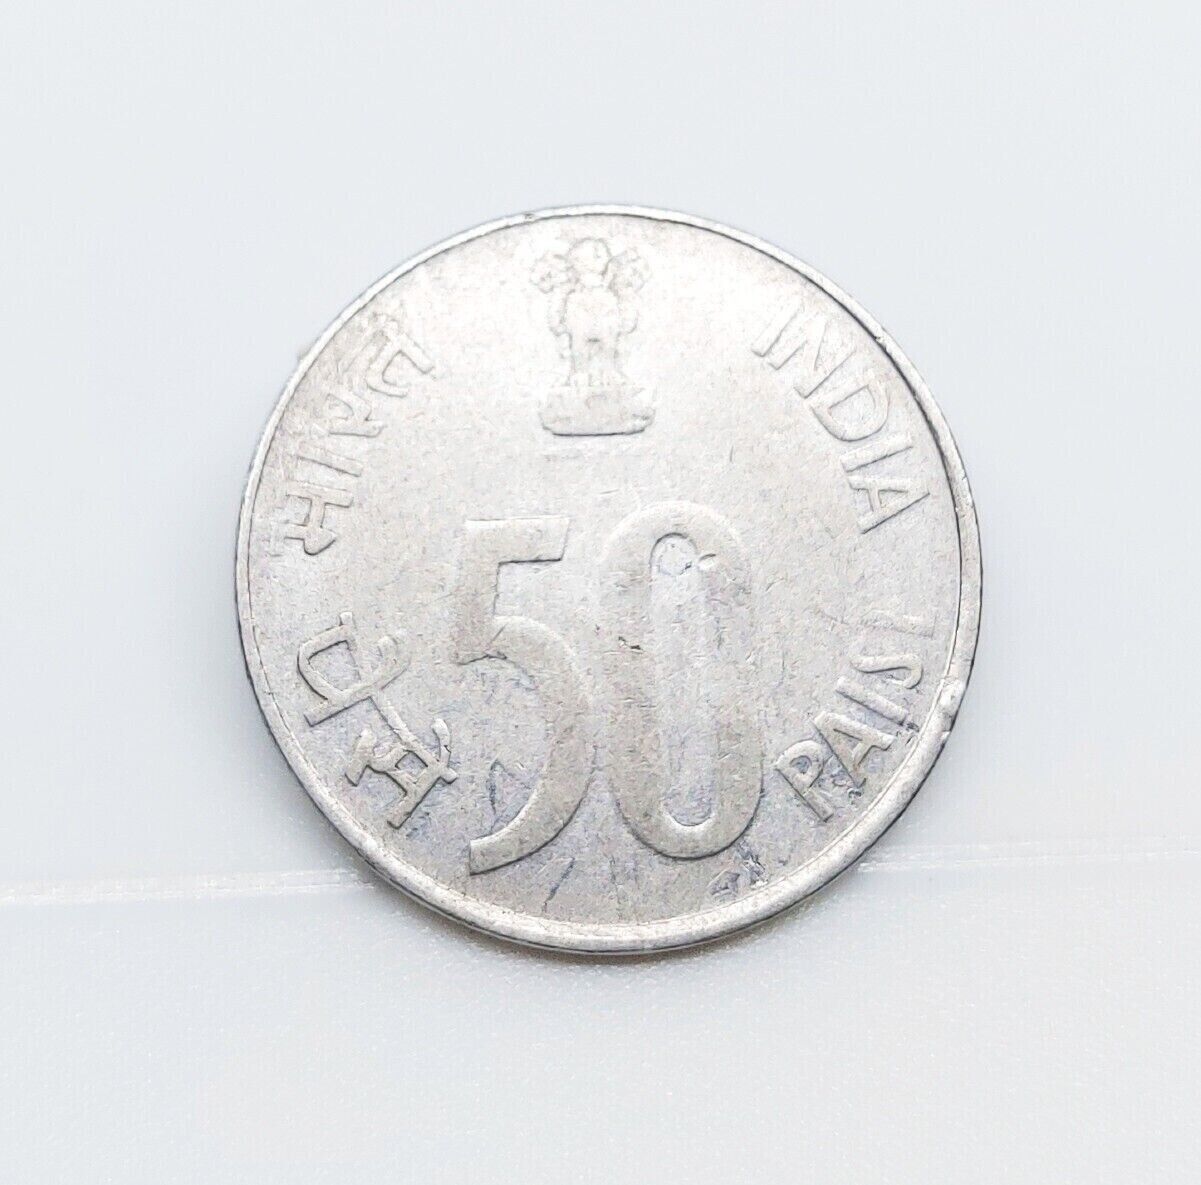 Indian 50 Paise Coin 1996 Year 100% Original